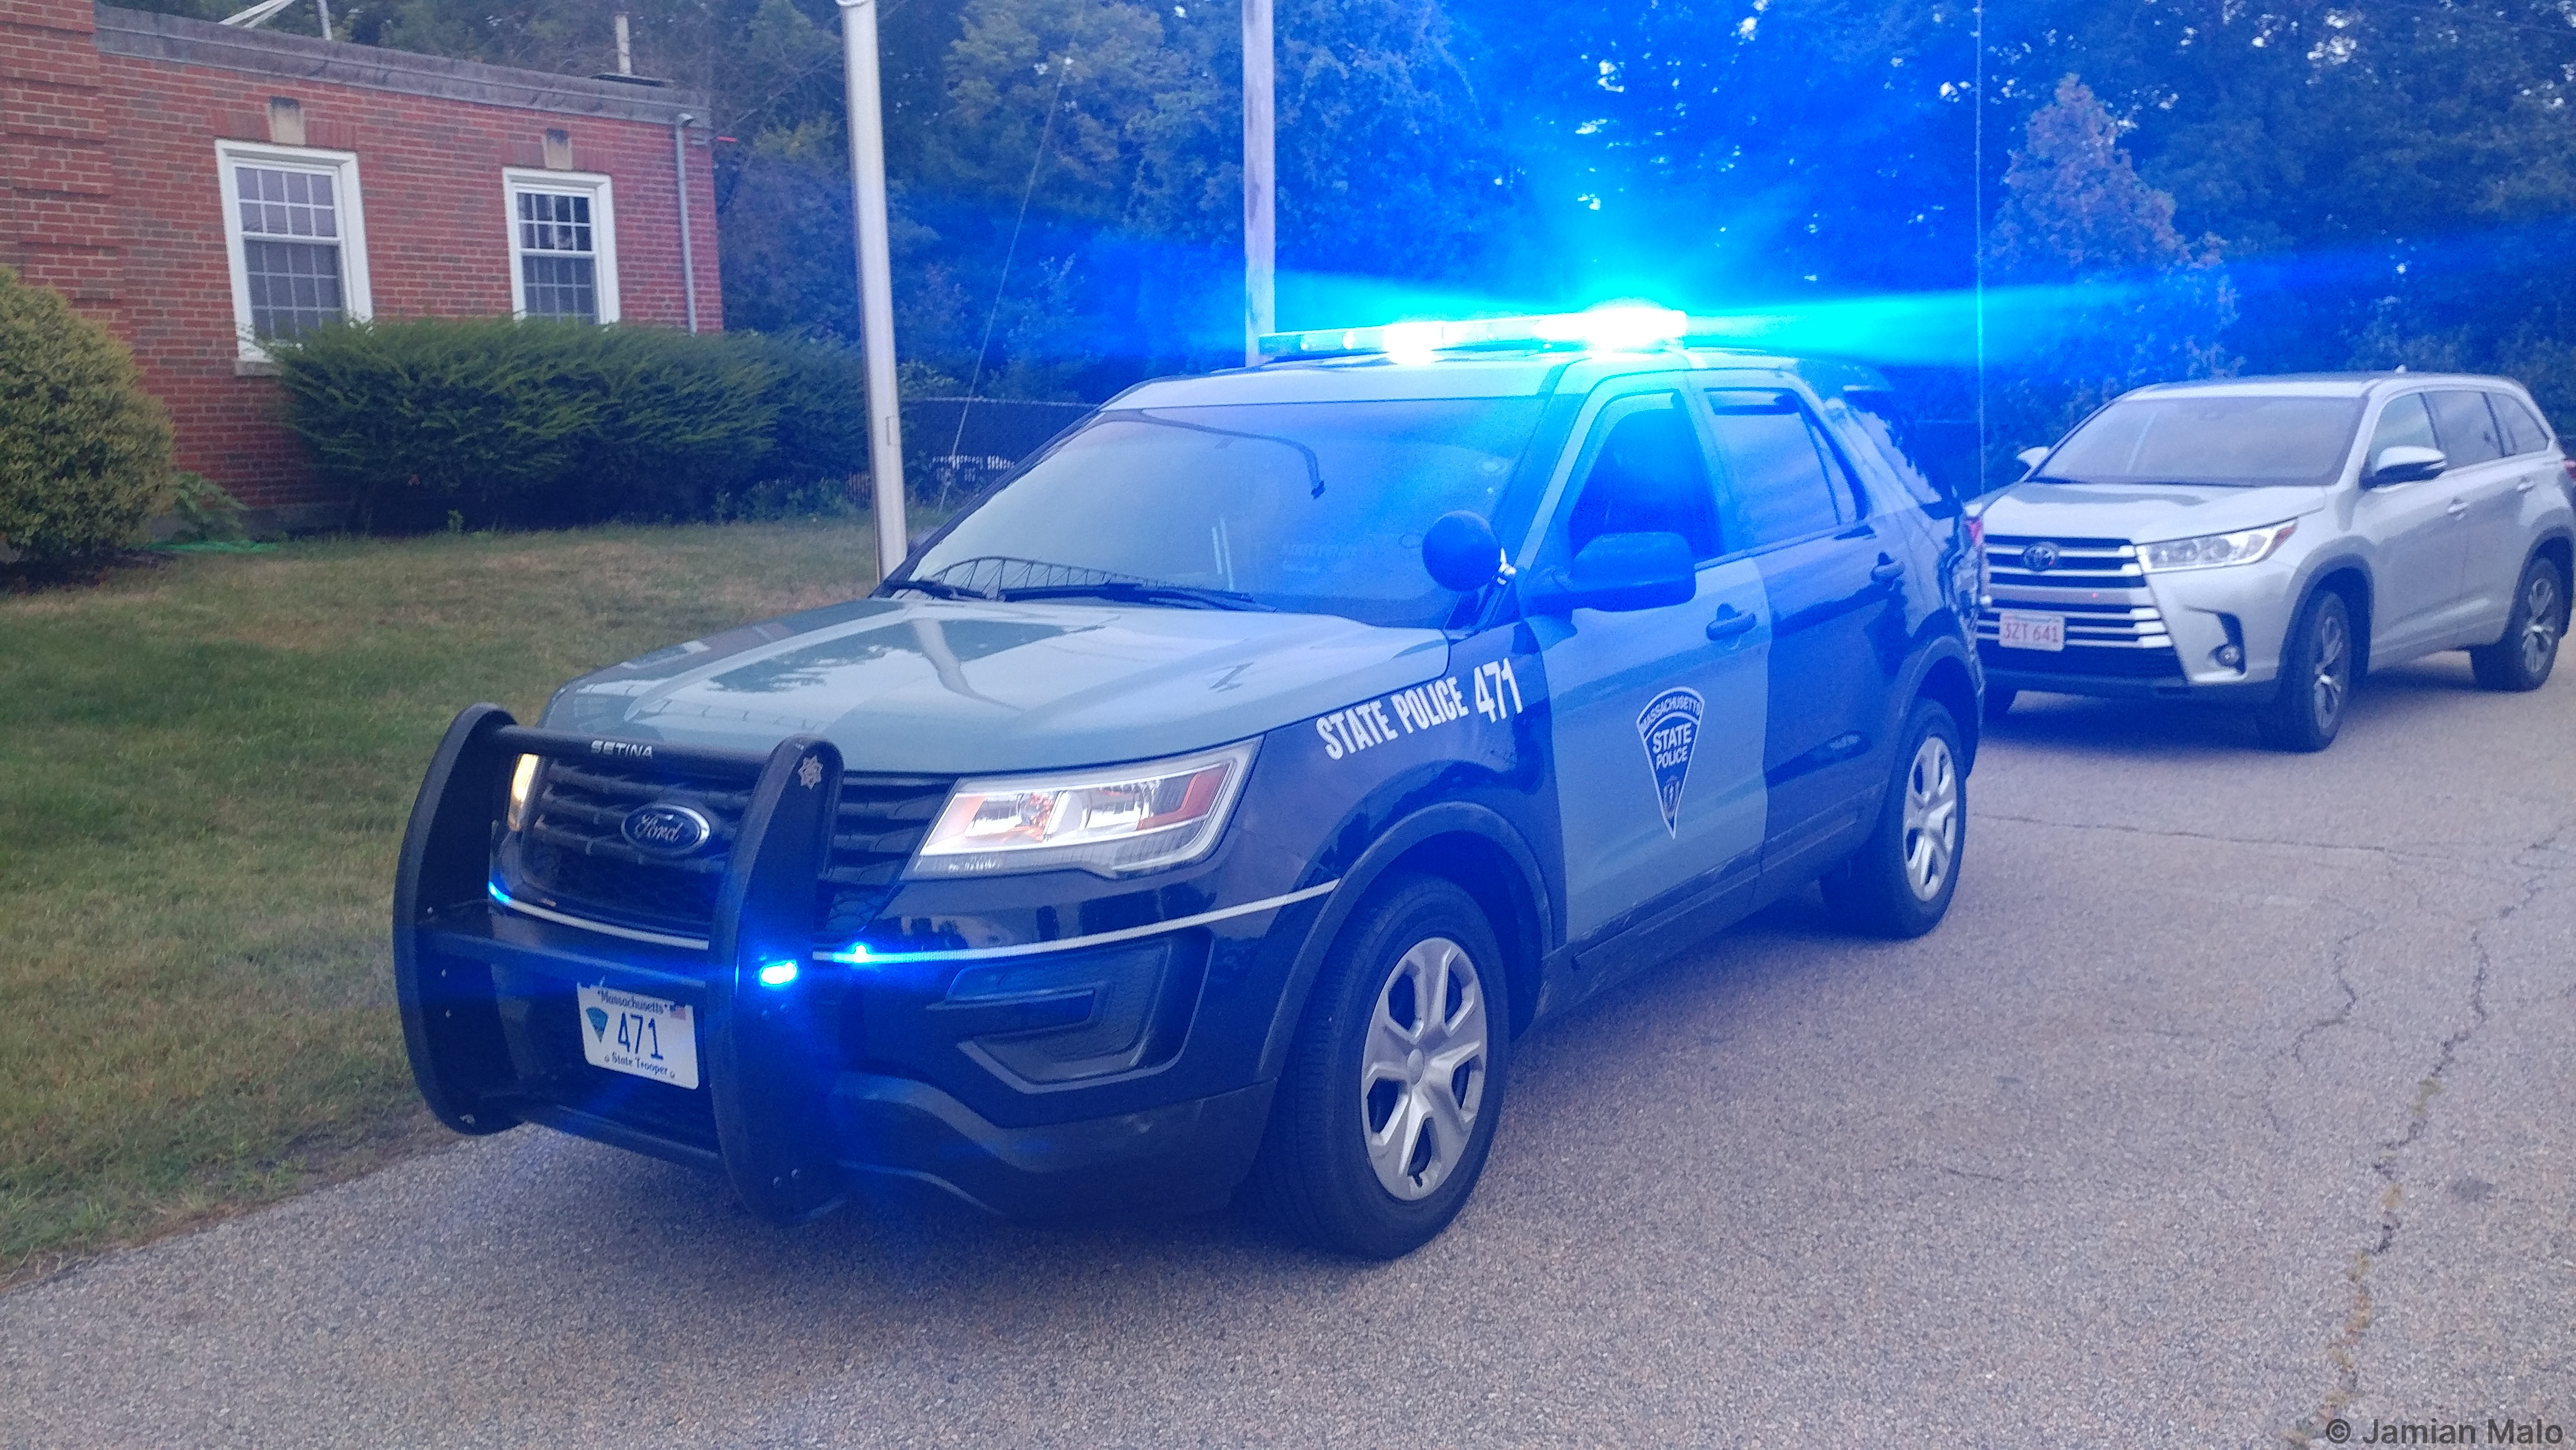 A photo  of Massachusetts State Police
            Cruiser 471, a 2016-2019 Ford Police Interceptor Utility             taken by Jamian Malo